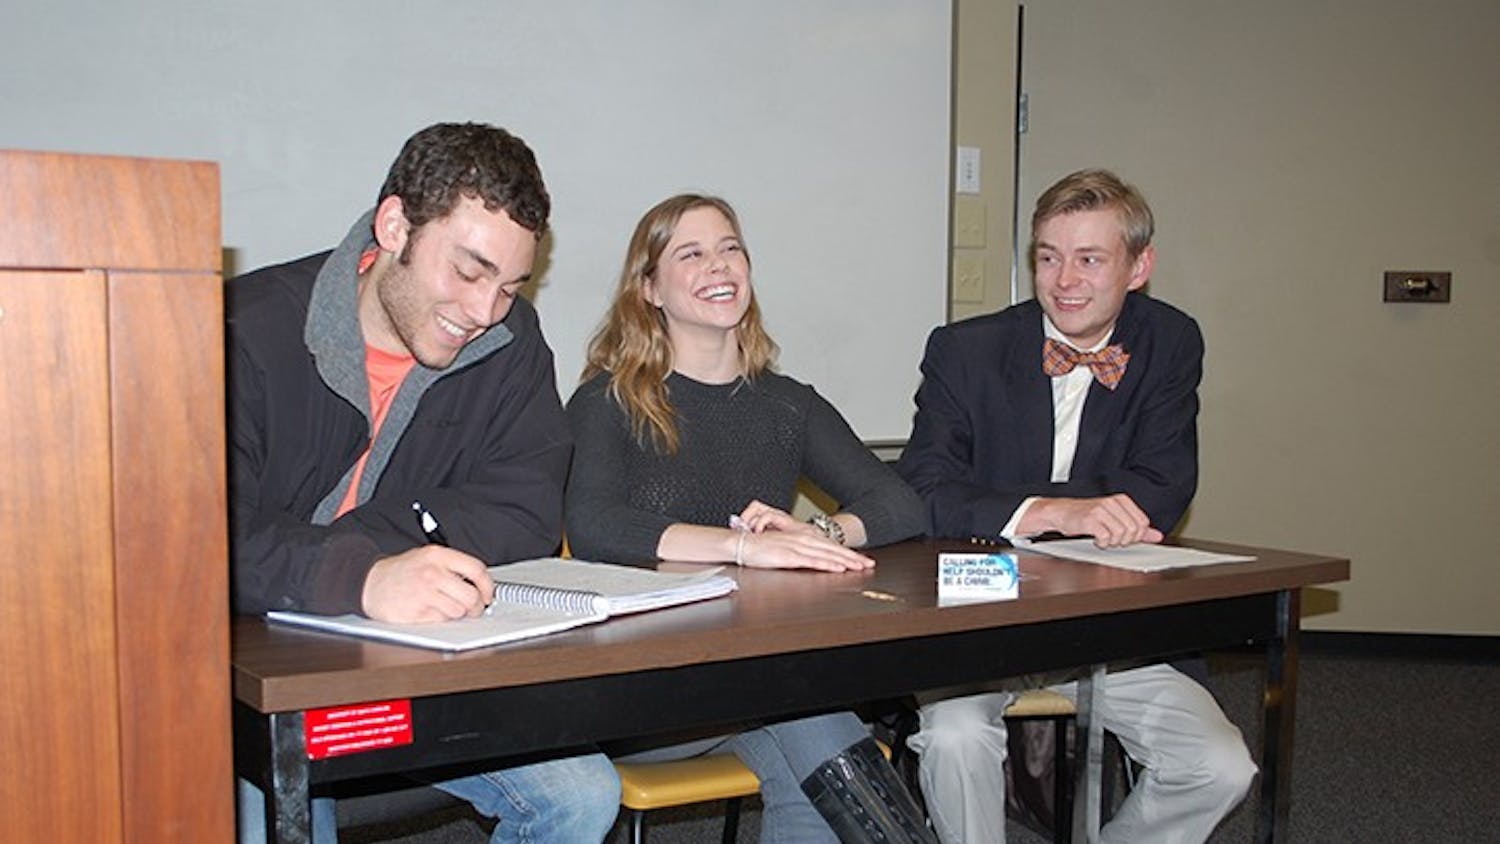 	SSDP board members (left to right) Brandon Santiago, Kristen Chimelewski and Pete Kahl at an interest meeting.